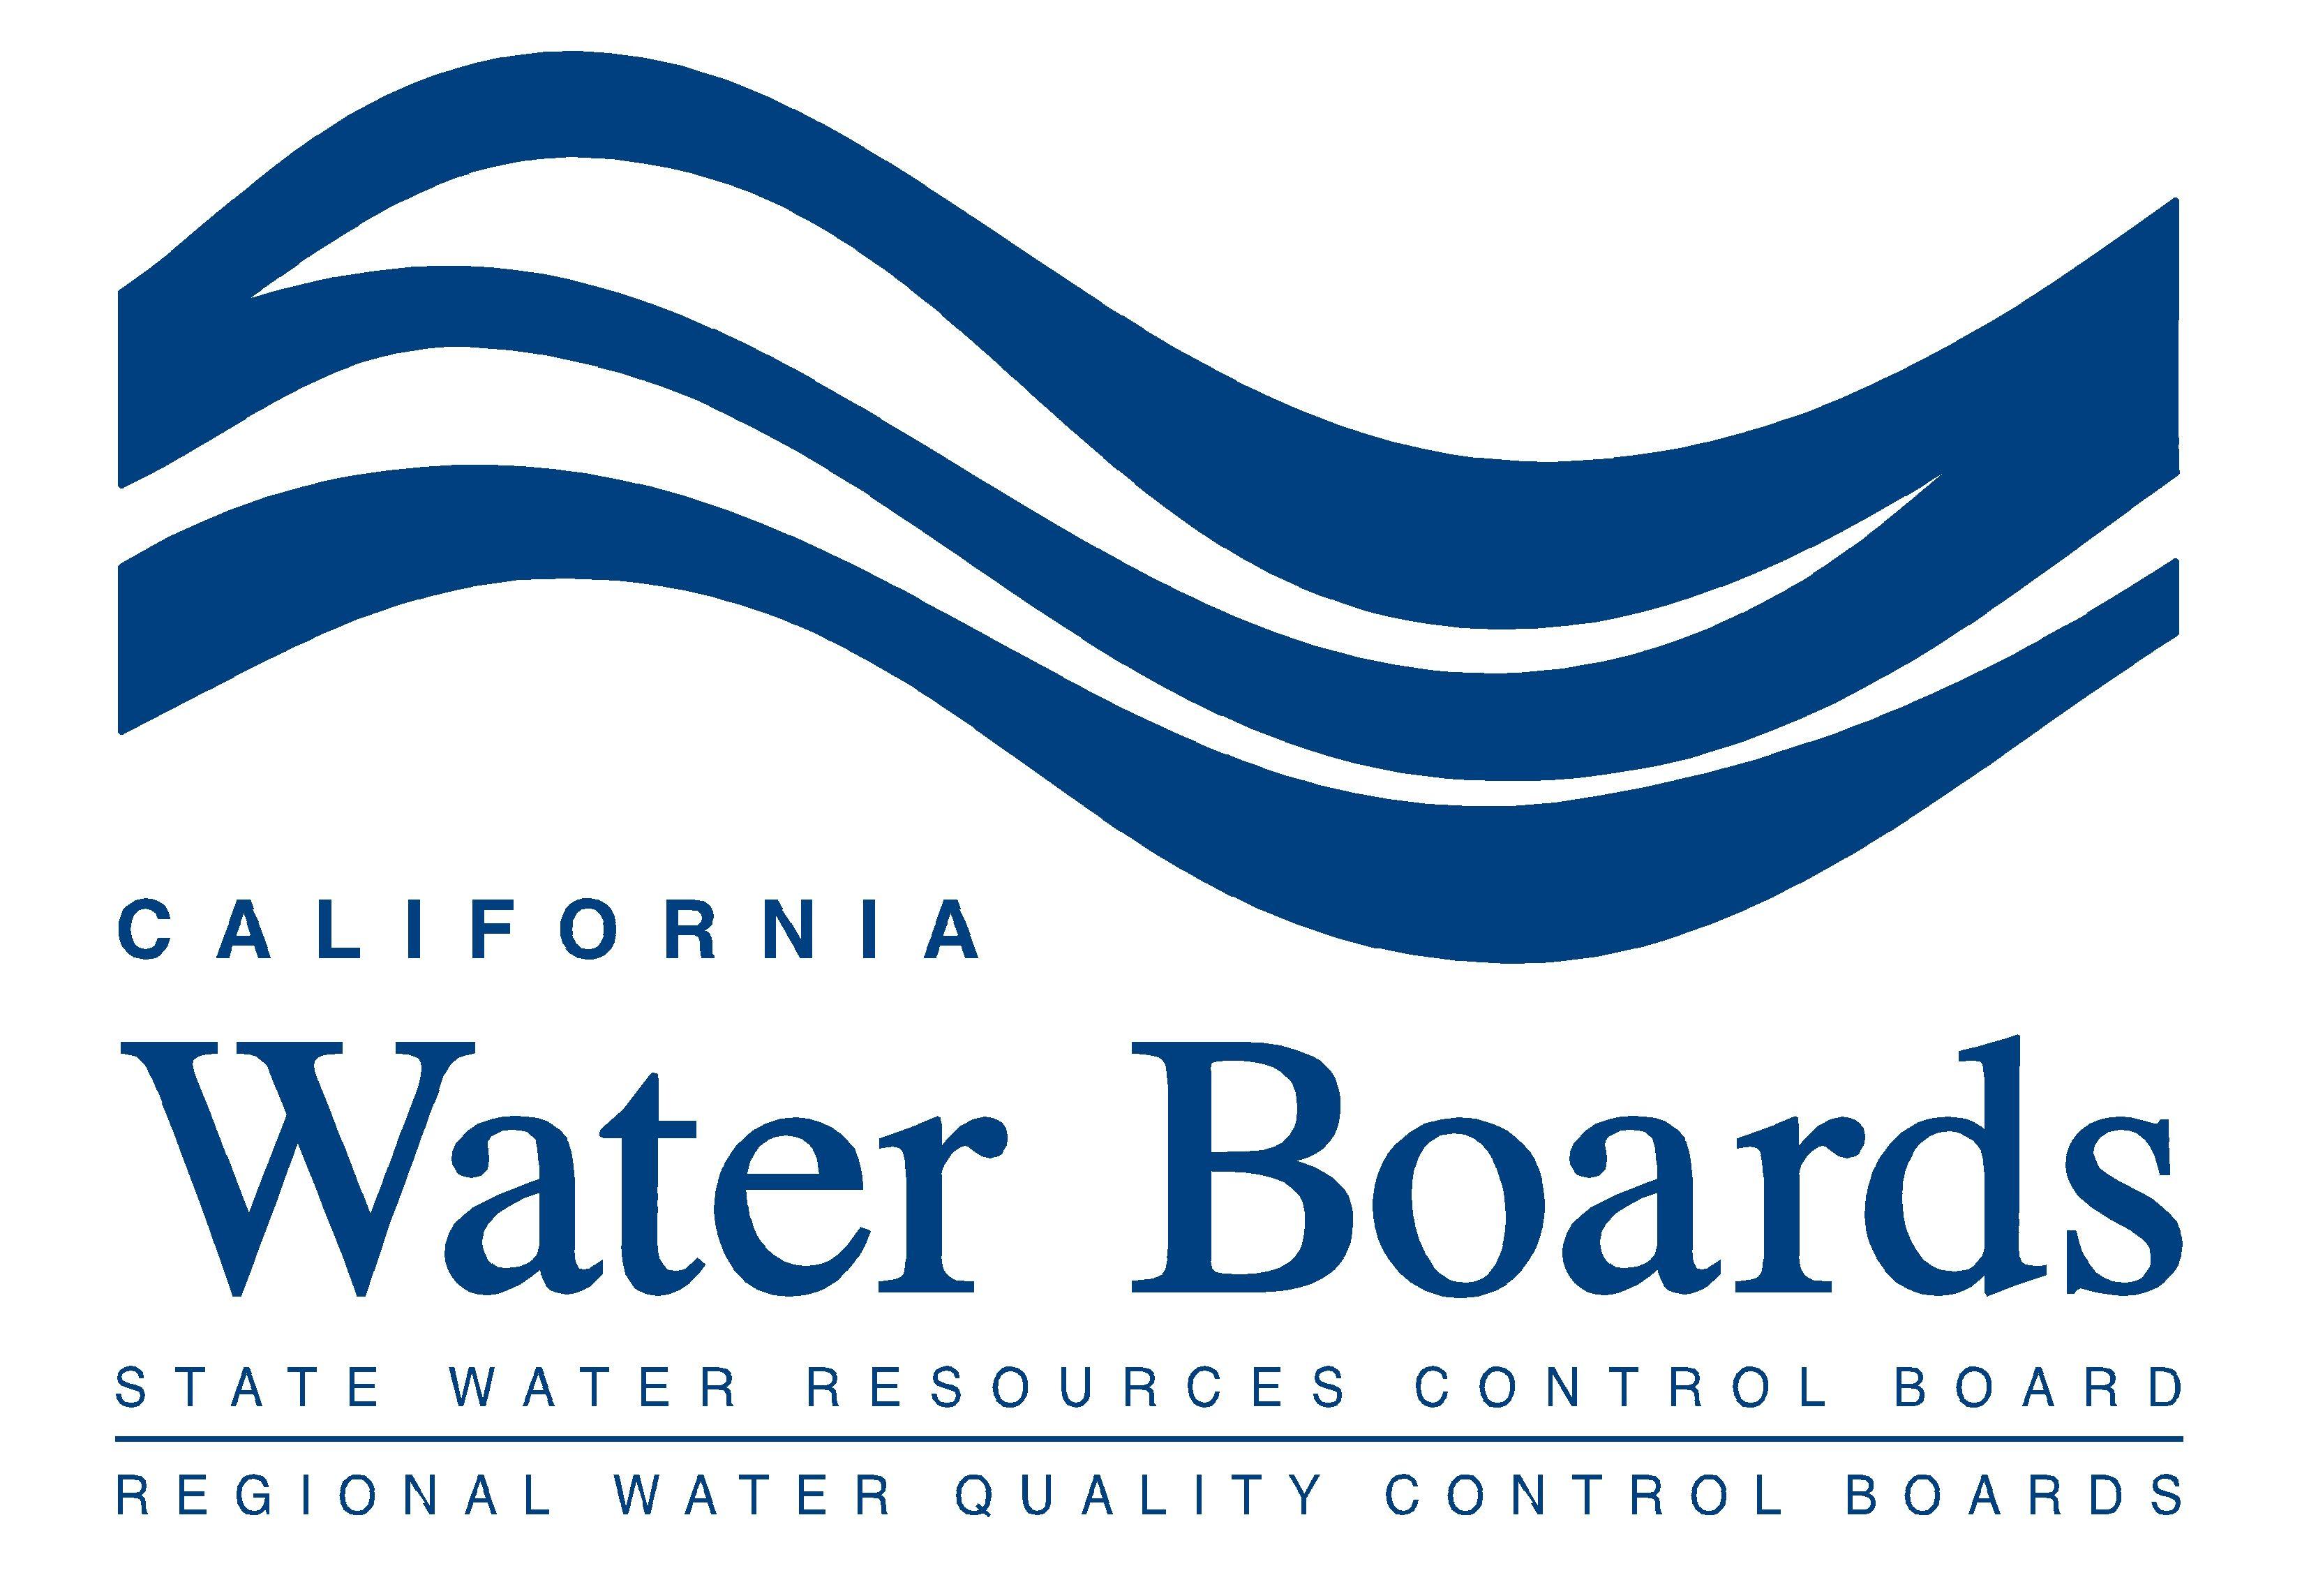 Cal EPA Logo - Daily Digest: Water conservation misses Governor's target in January